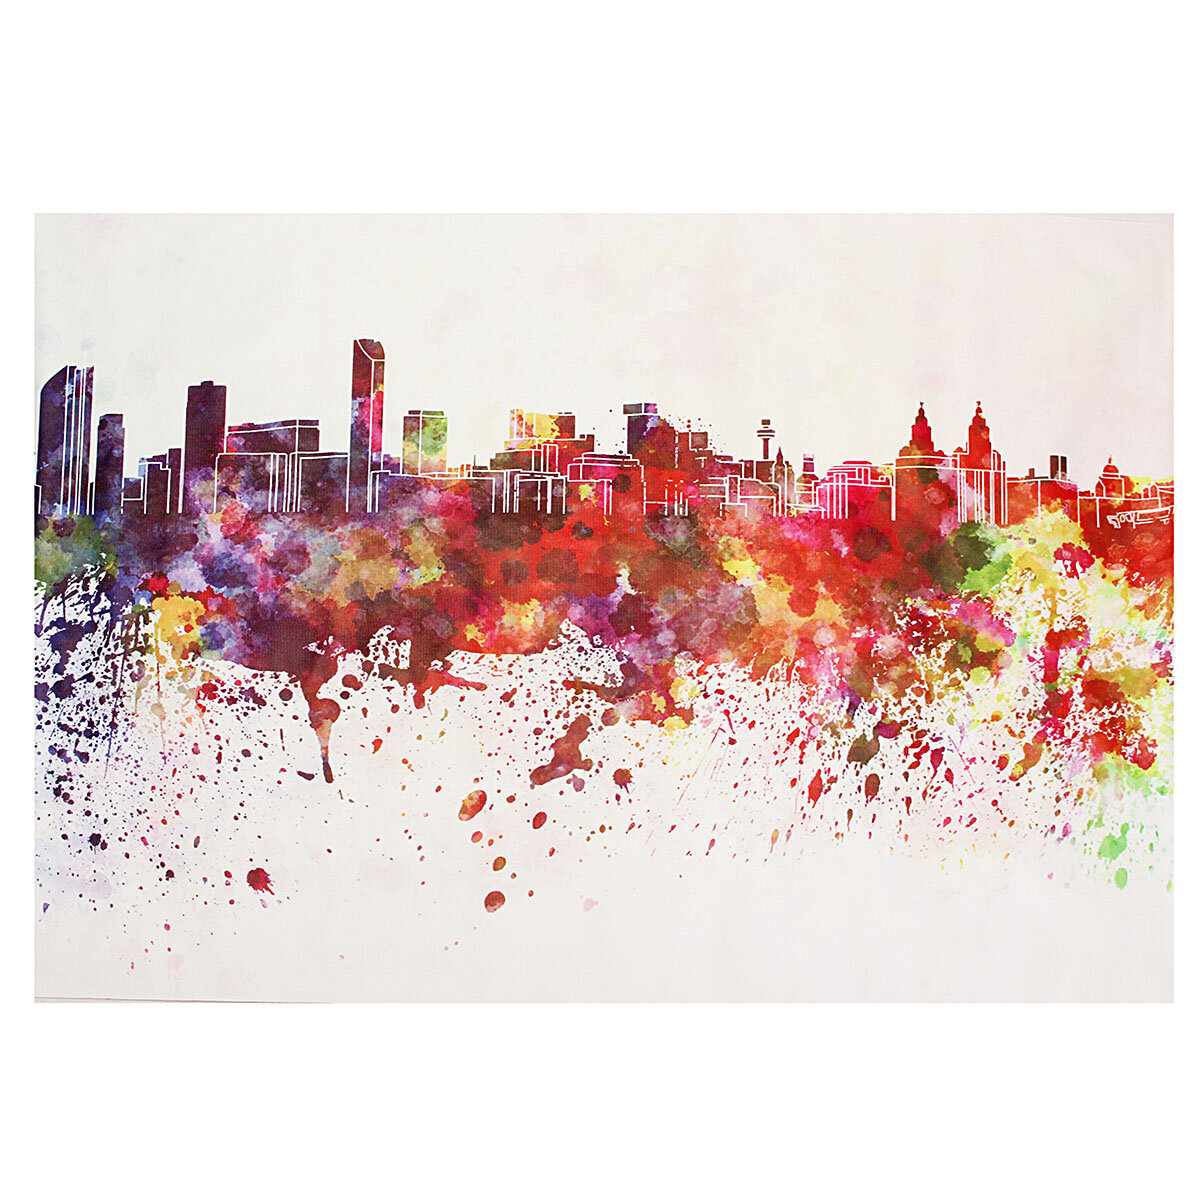 DIY Art Painting Color City Building Painting Canvas Decor Home Decoration Wall Pictures Living Room Wall Home Decor, Banggood  - buy with discount